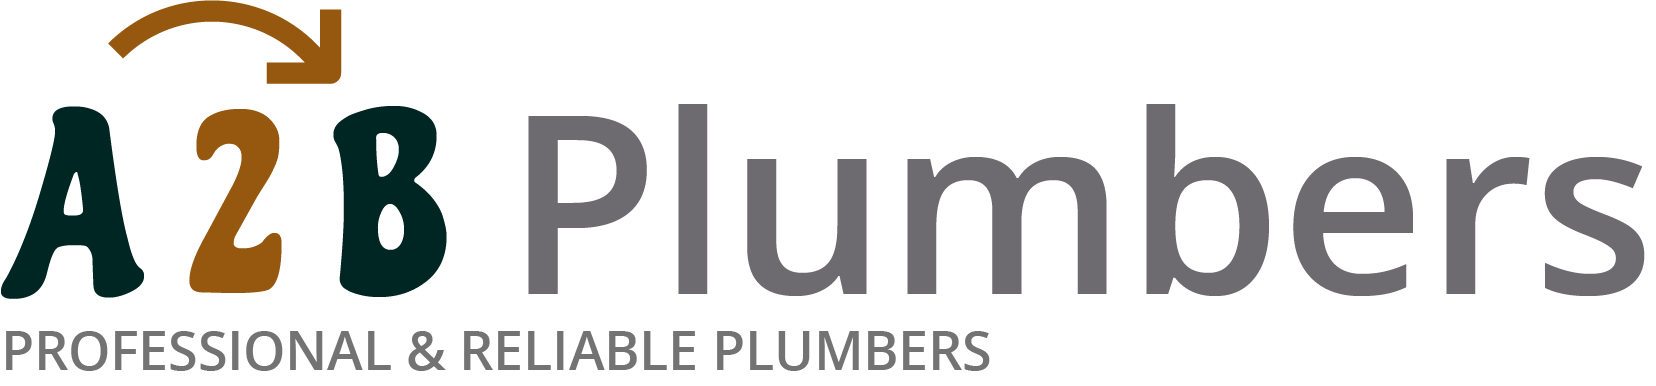 If you need a boiler installed, a radiator repaired or a leaking tap fixed, call us now - we provide services for properties in Frome and the local area.